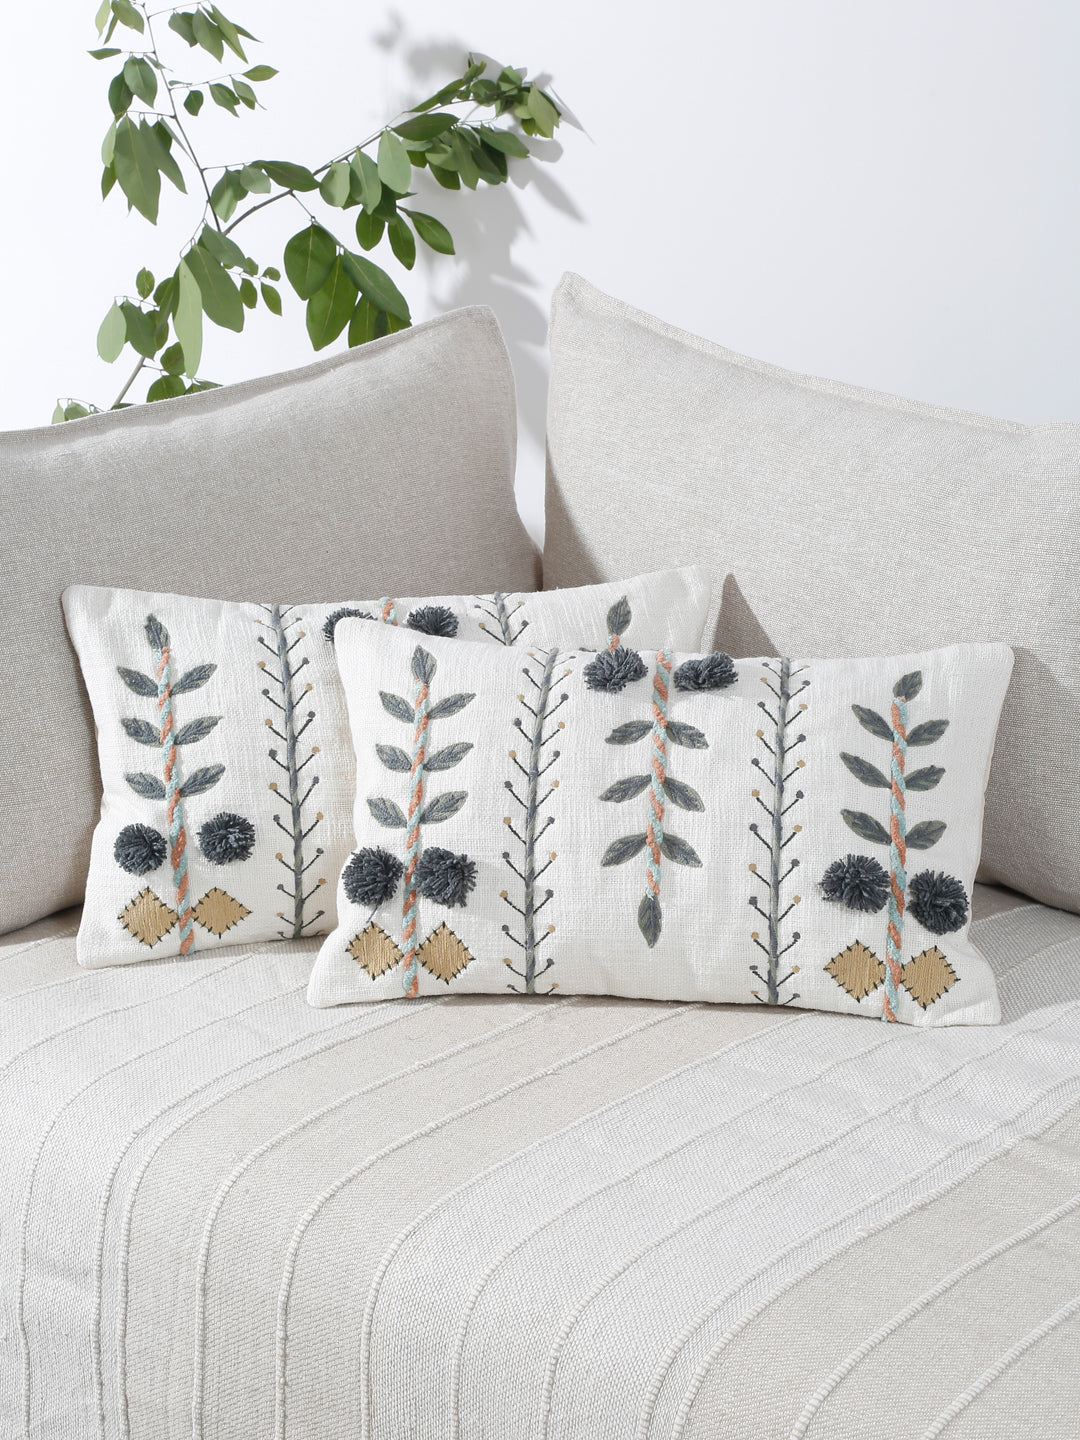 Set of 2 White & Grey Cotton Embroidered Square Cushion Covers